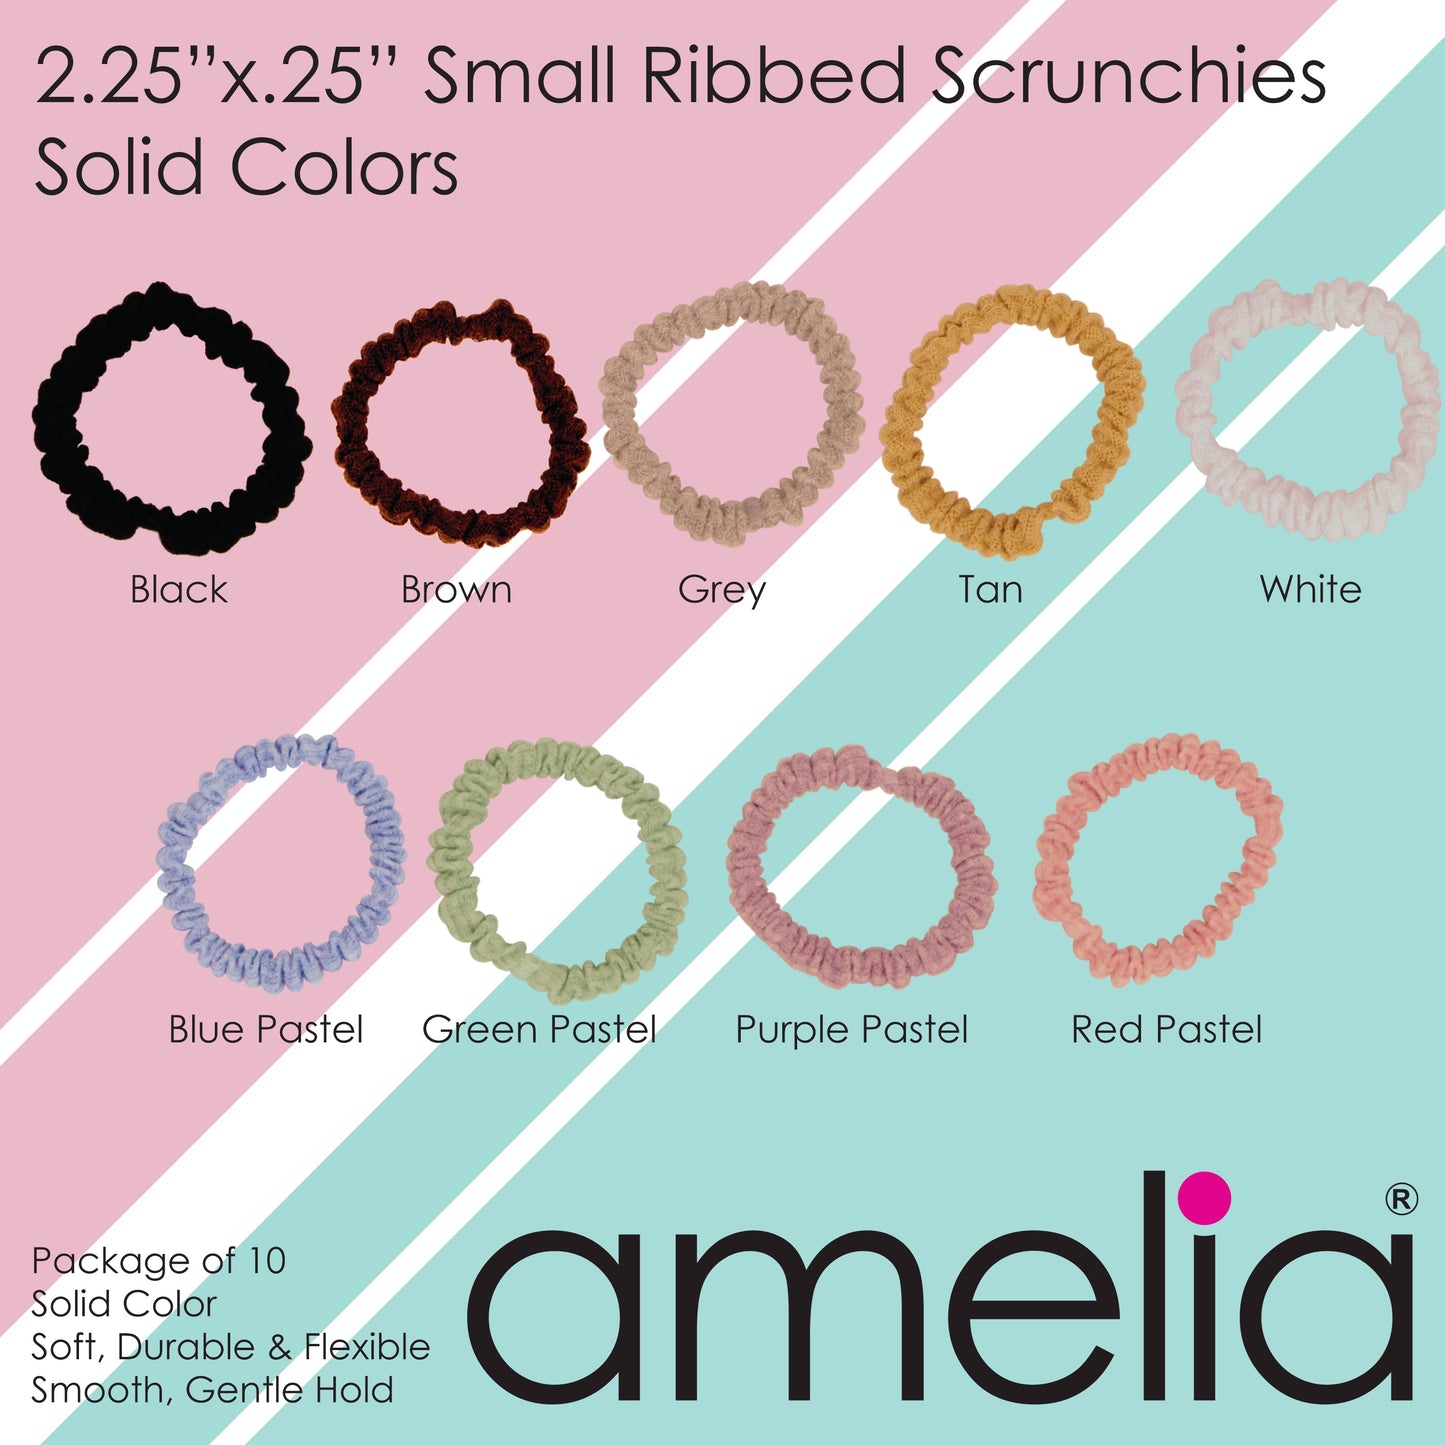 Amelia Beauty, Pastel Green Ribbed Scrunchies, 2.25in Diameter, Gentle on Hair, Strong Hold, No Snag, No Dents or Creases. 10 Pack